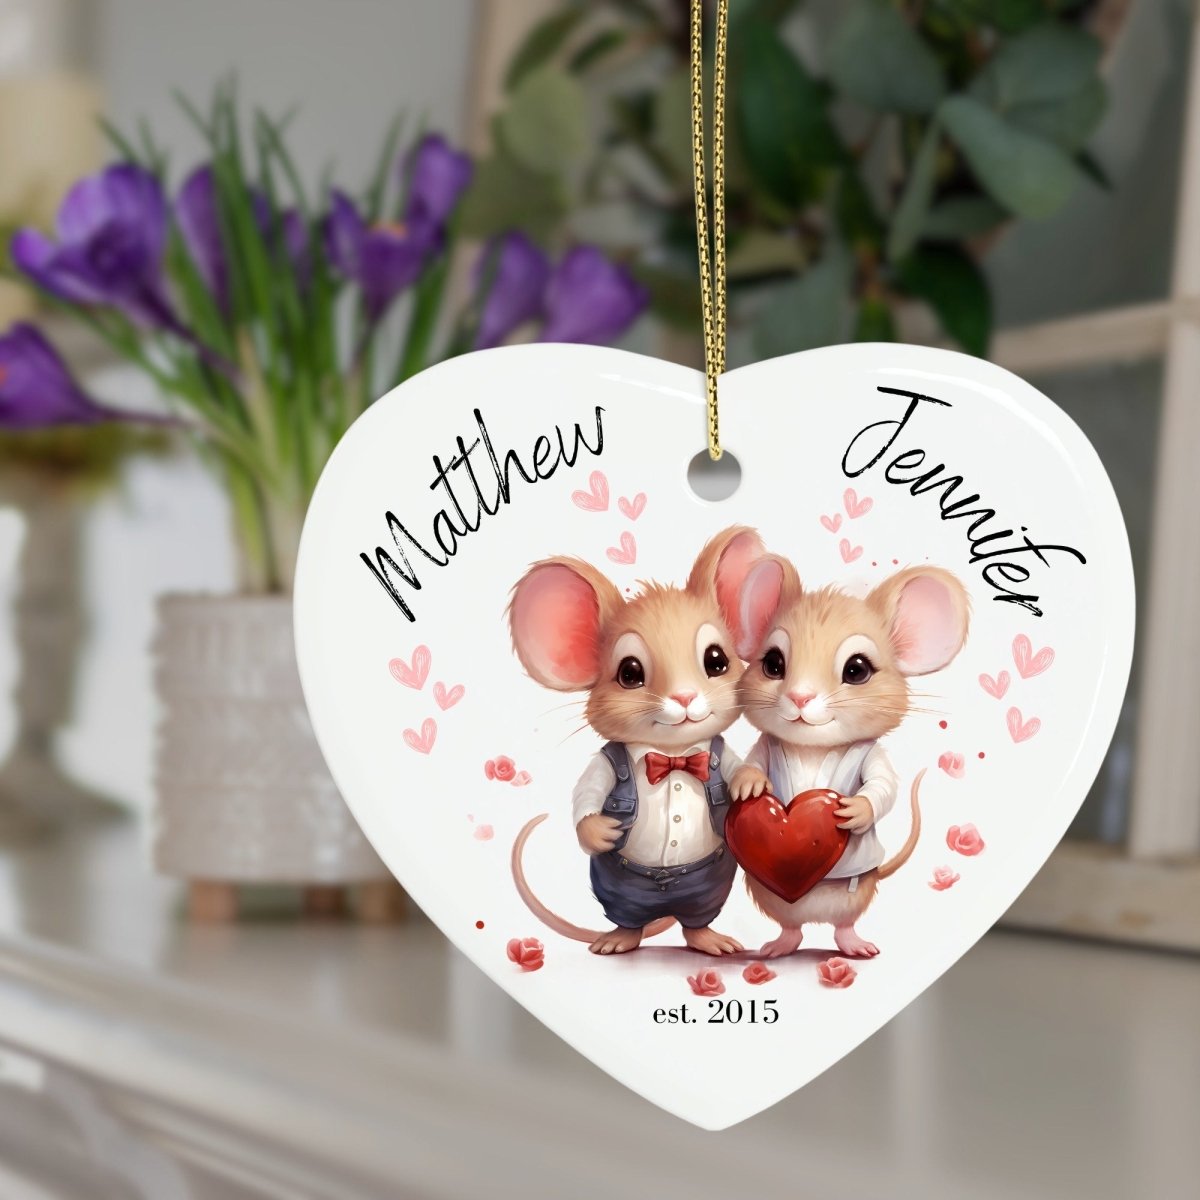 Cute personalised Mouse Couple Ornament Ceramic Heart Ornament Lovers Keepsake Valentines Day Gift Anniversary Gift Idea for Soulmates - Everything Pixel